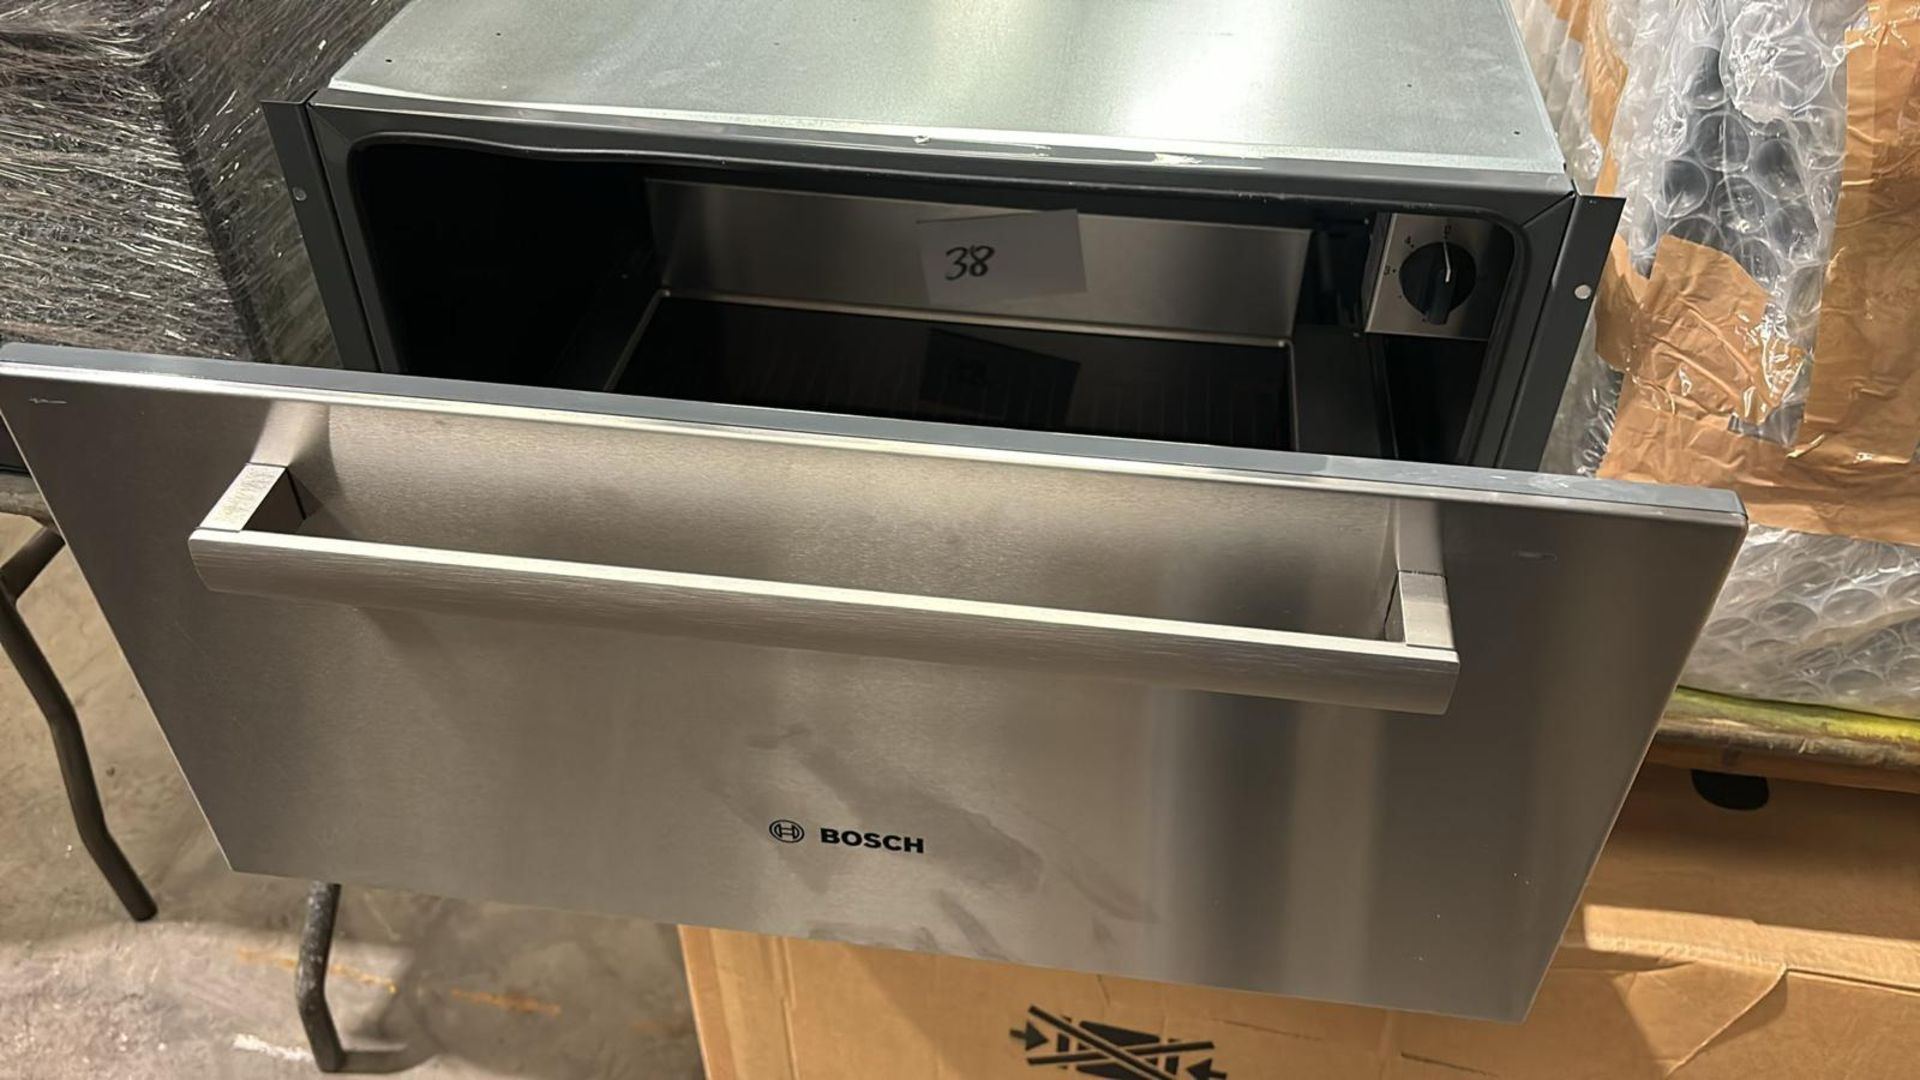 Ex-Display Brand New Boxed Bosch HSC290650B Built-in warming drawer Stainless steel RRP £999 - Image 7 of 7